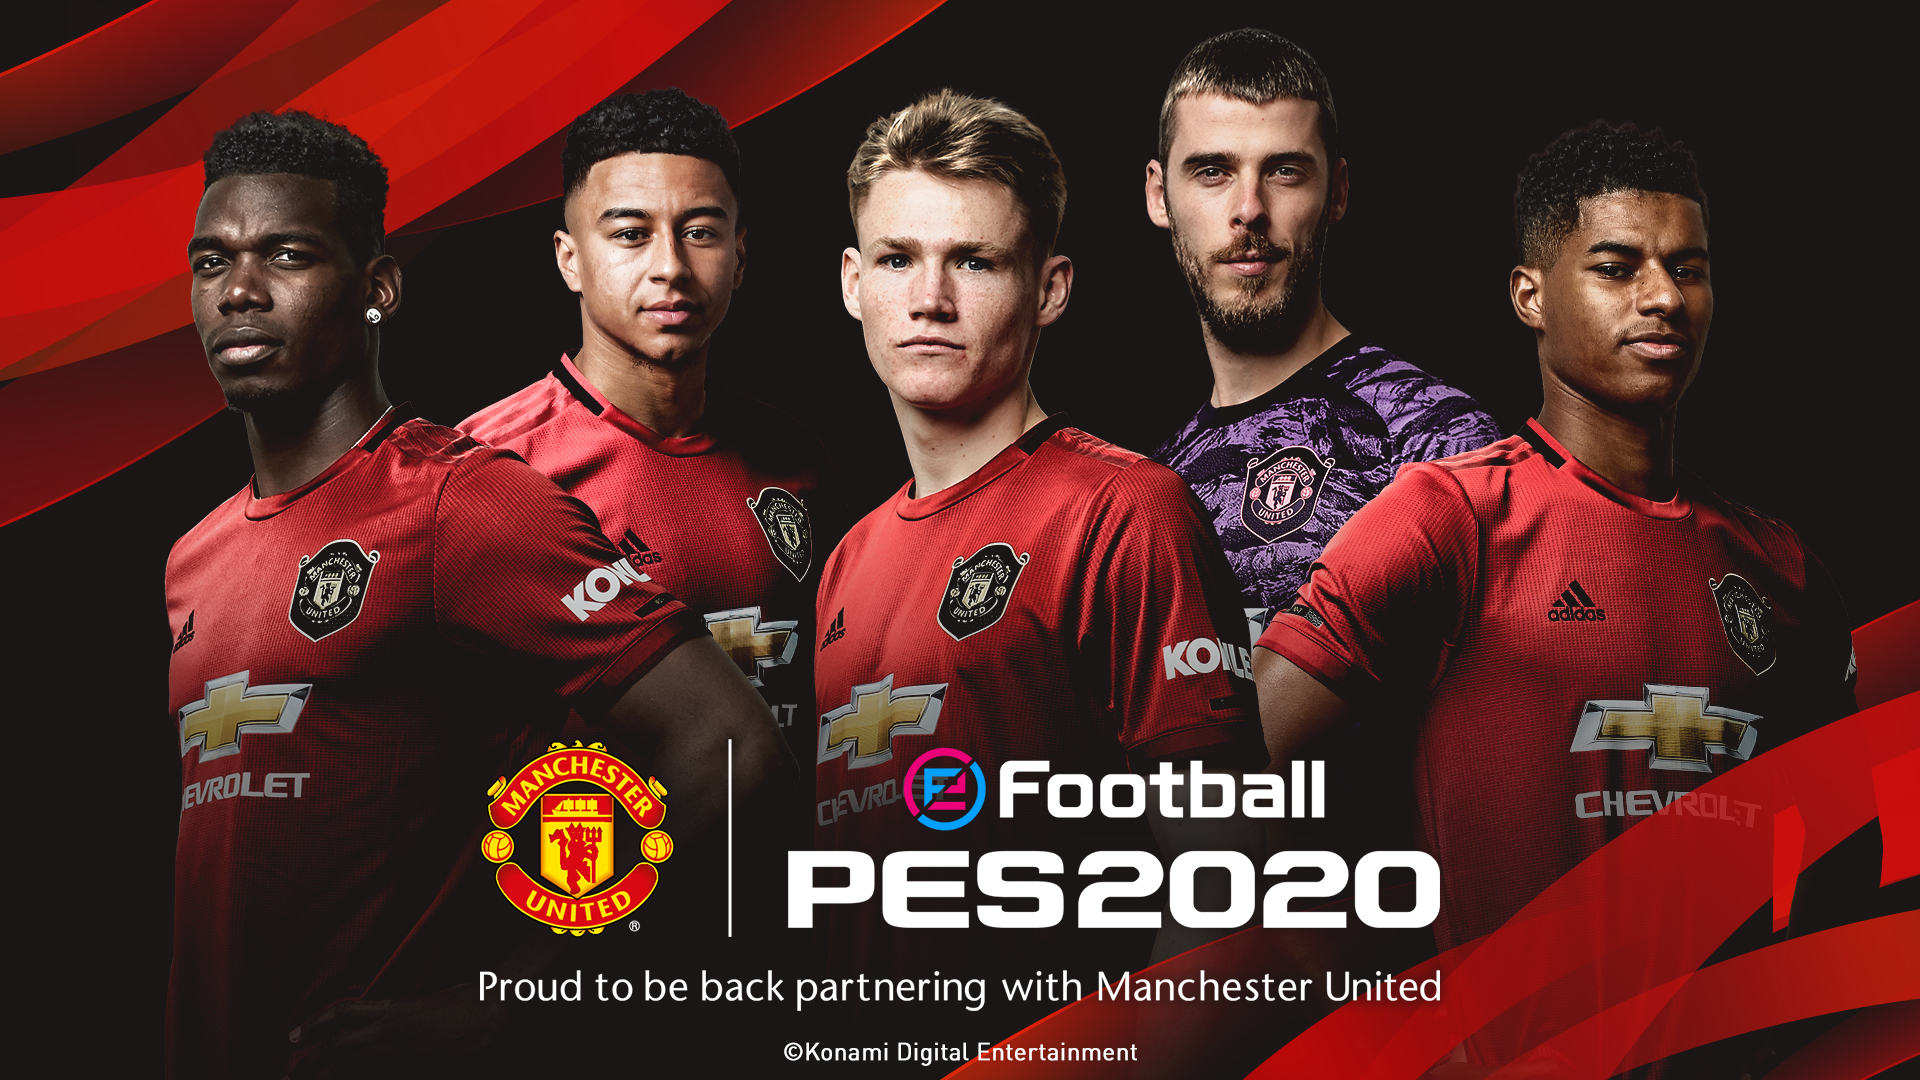 Manchester United Official Partnership. PES